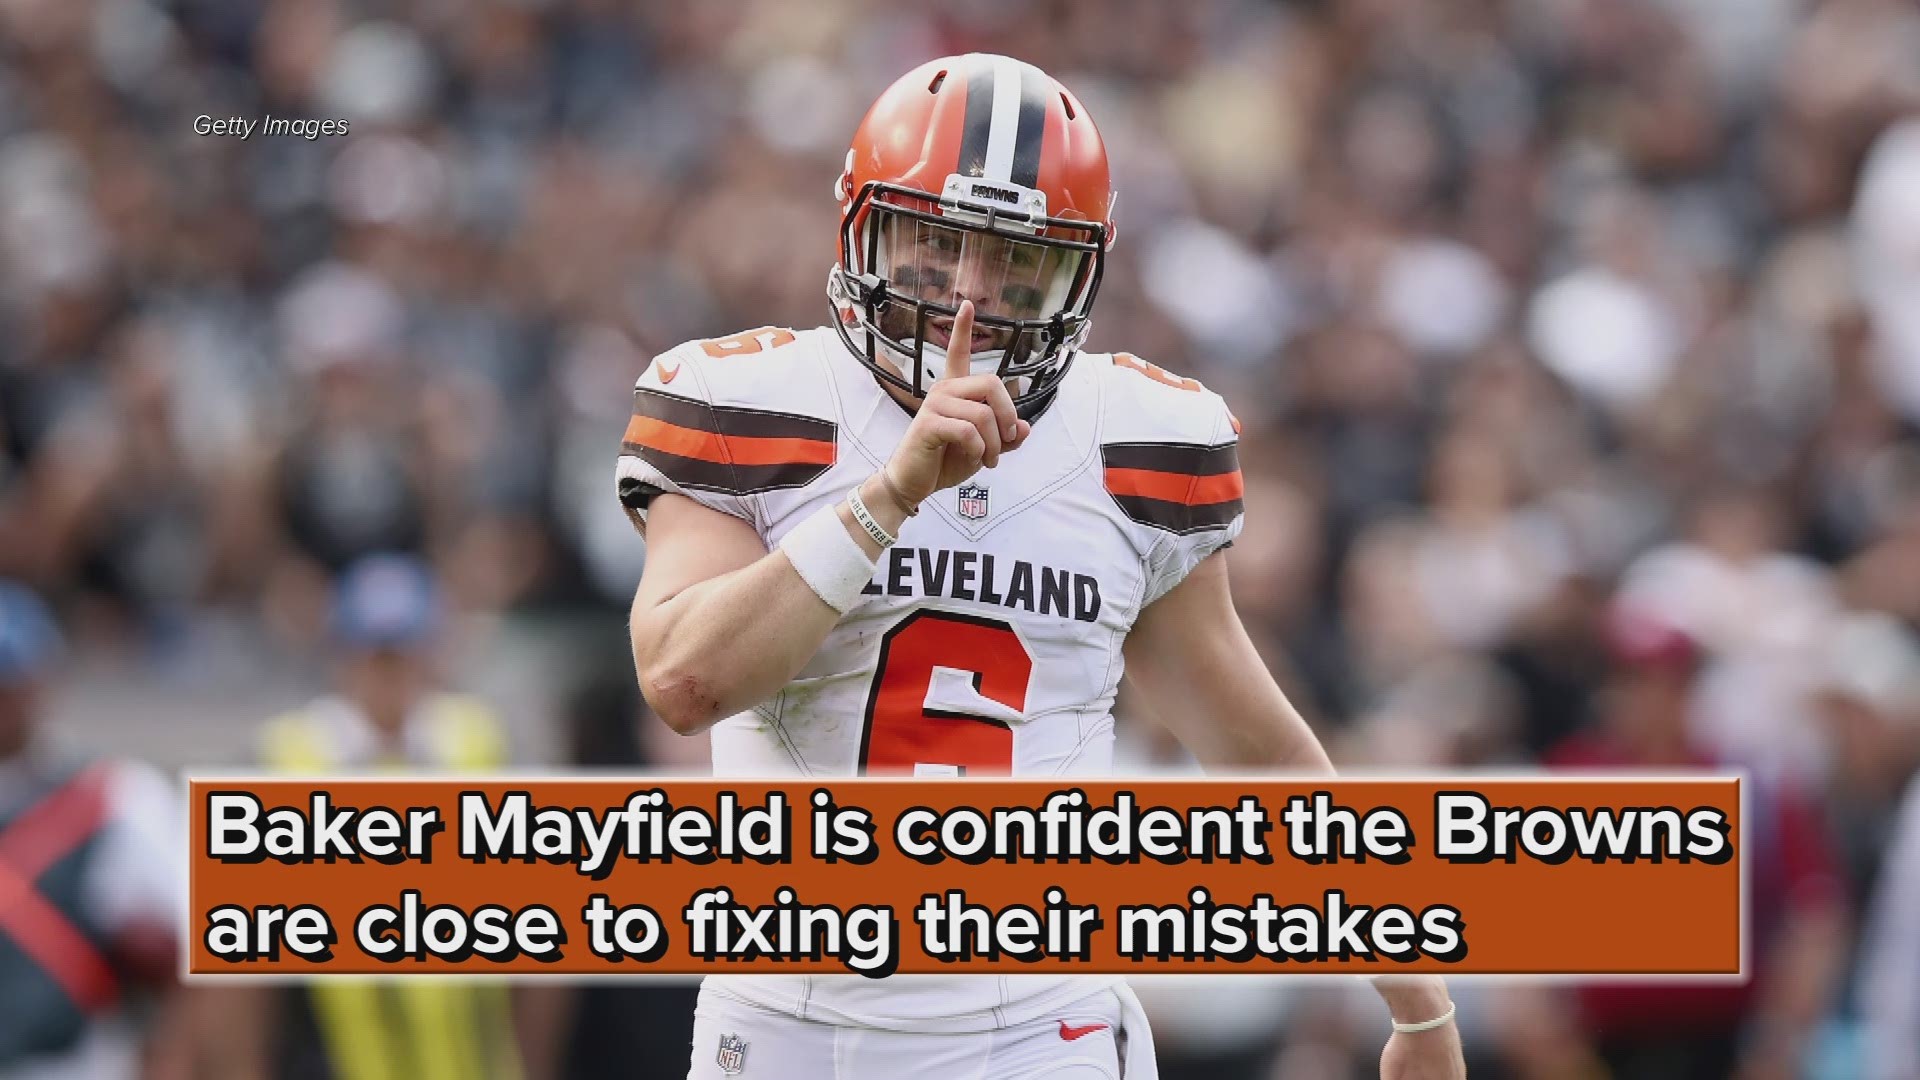 RECAP: Baker Mayfield says Cleveland Browns 'very close' to fixing issues